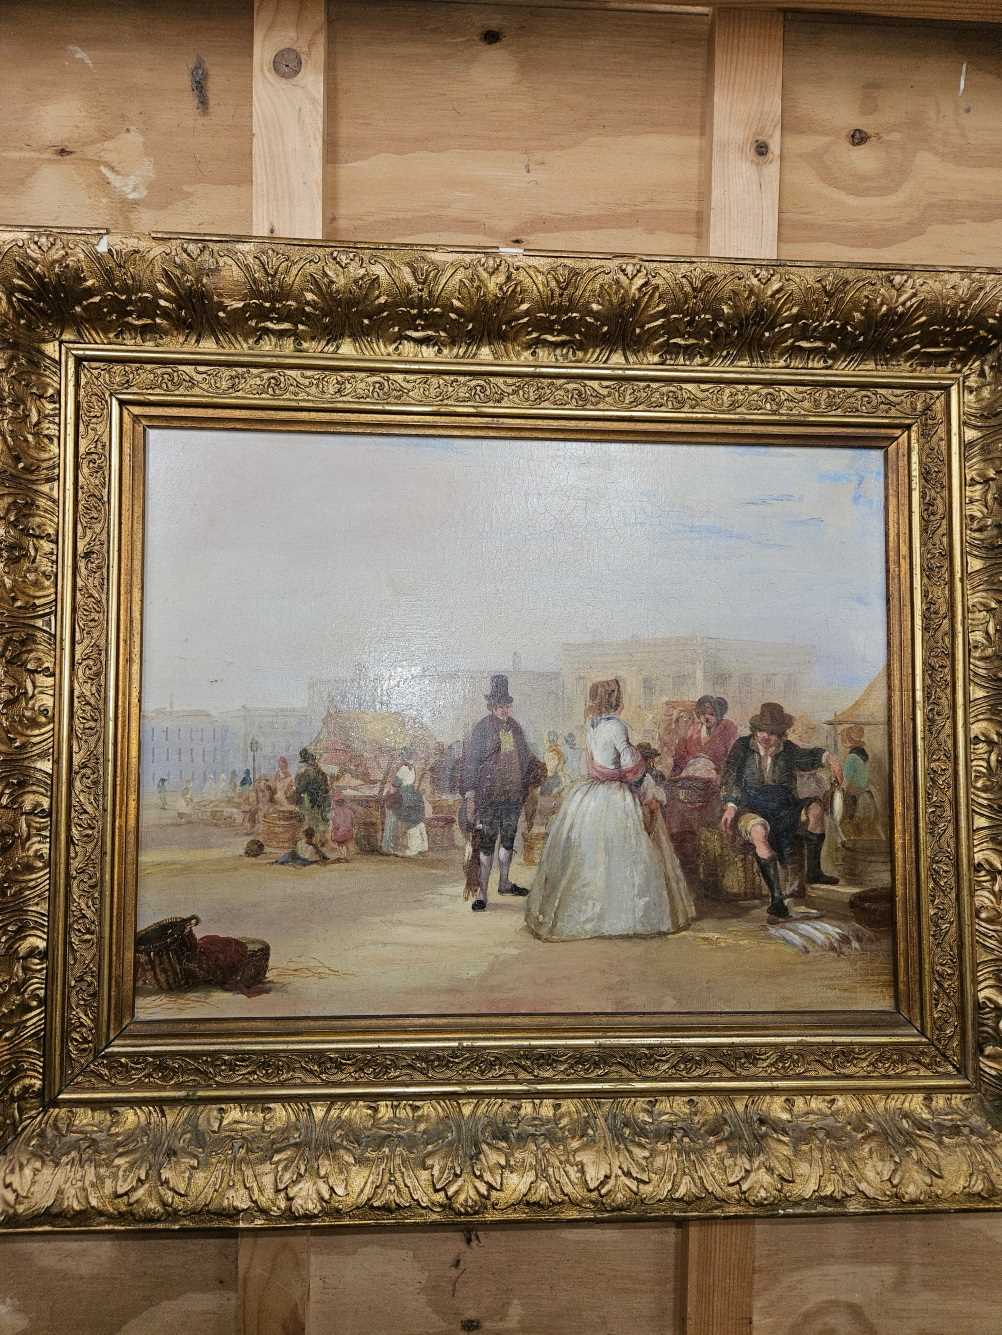 ENGLISH SCHOOL (19TH CENTURY), RAMSGATE MARKET, OIL ON CANVAS, 44 x 34cm. This has been cleaned